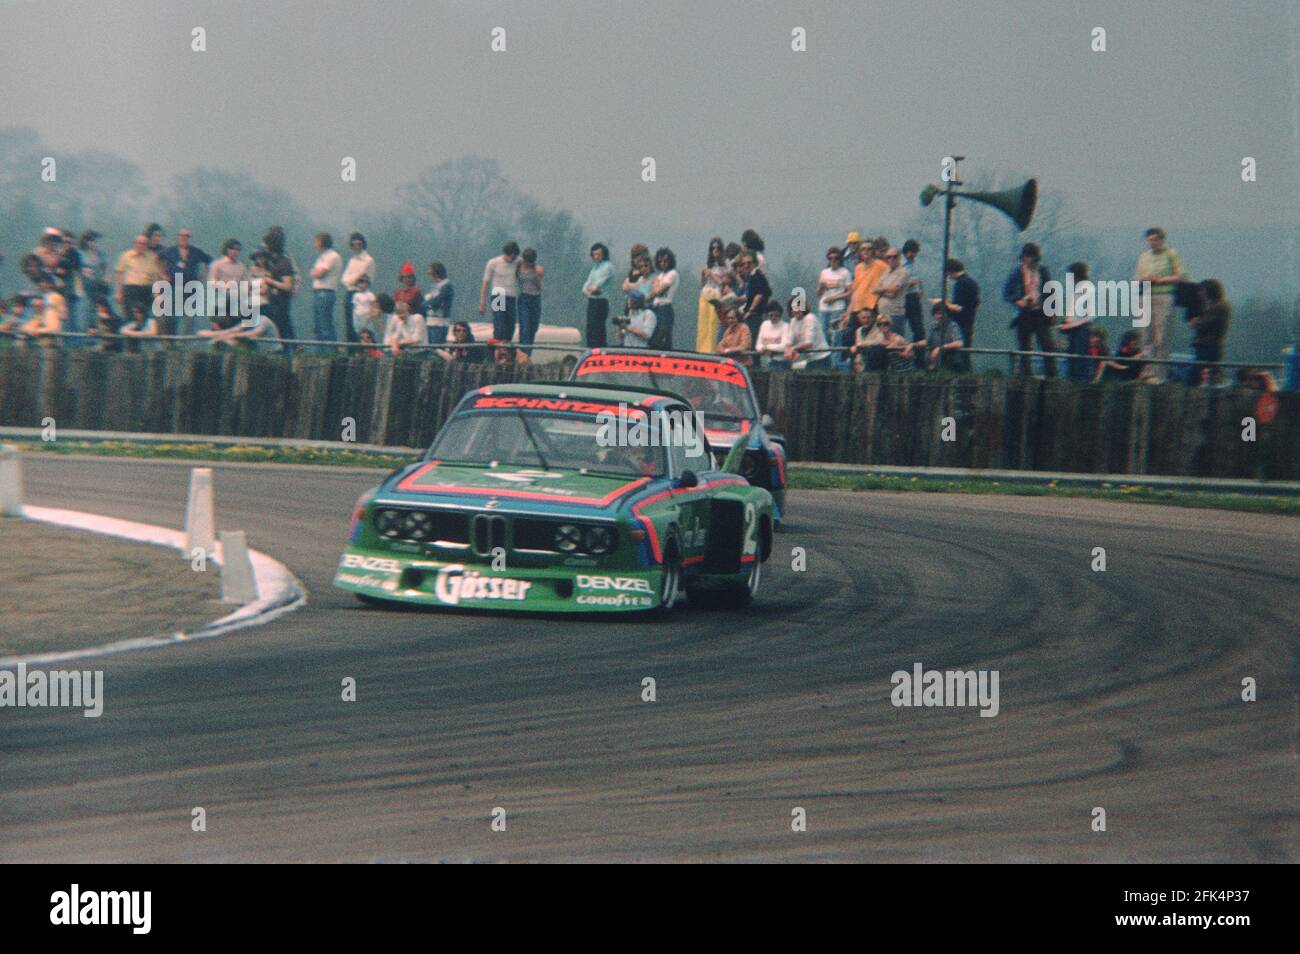 The BMW 3.5CSL of Dieter Quester and Albrecht Krebs in the first Silverstone 6 Hours Group 5 race, 1976. Stock Photo